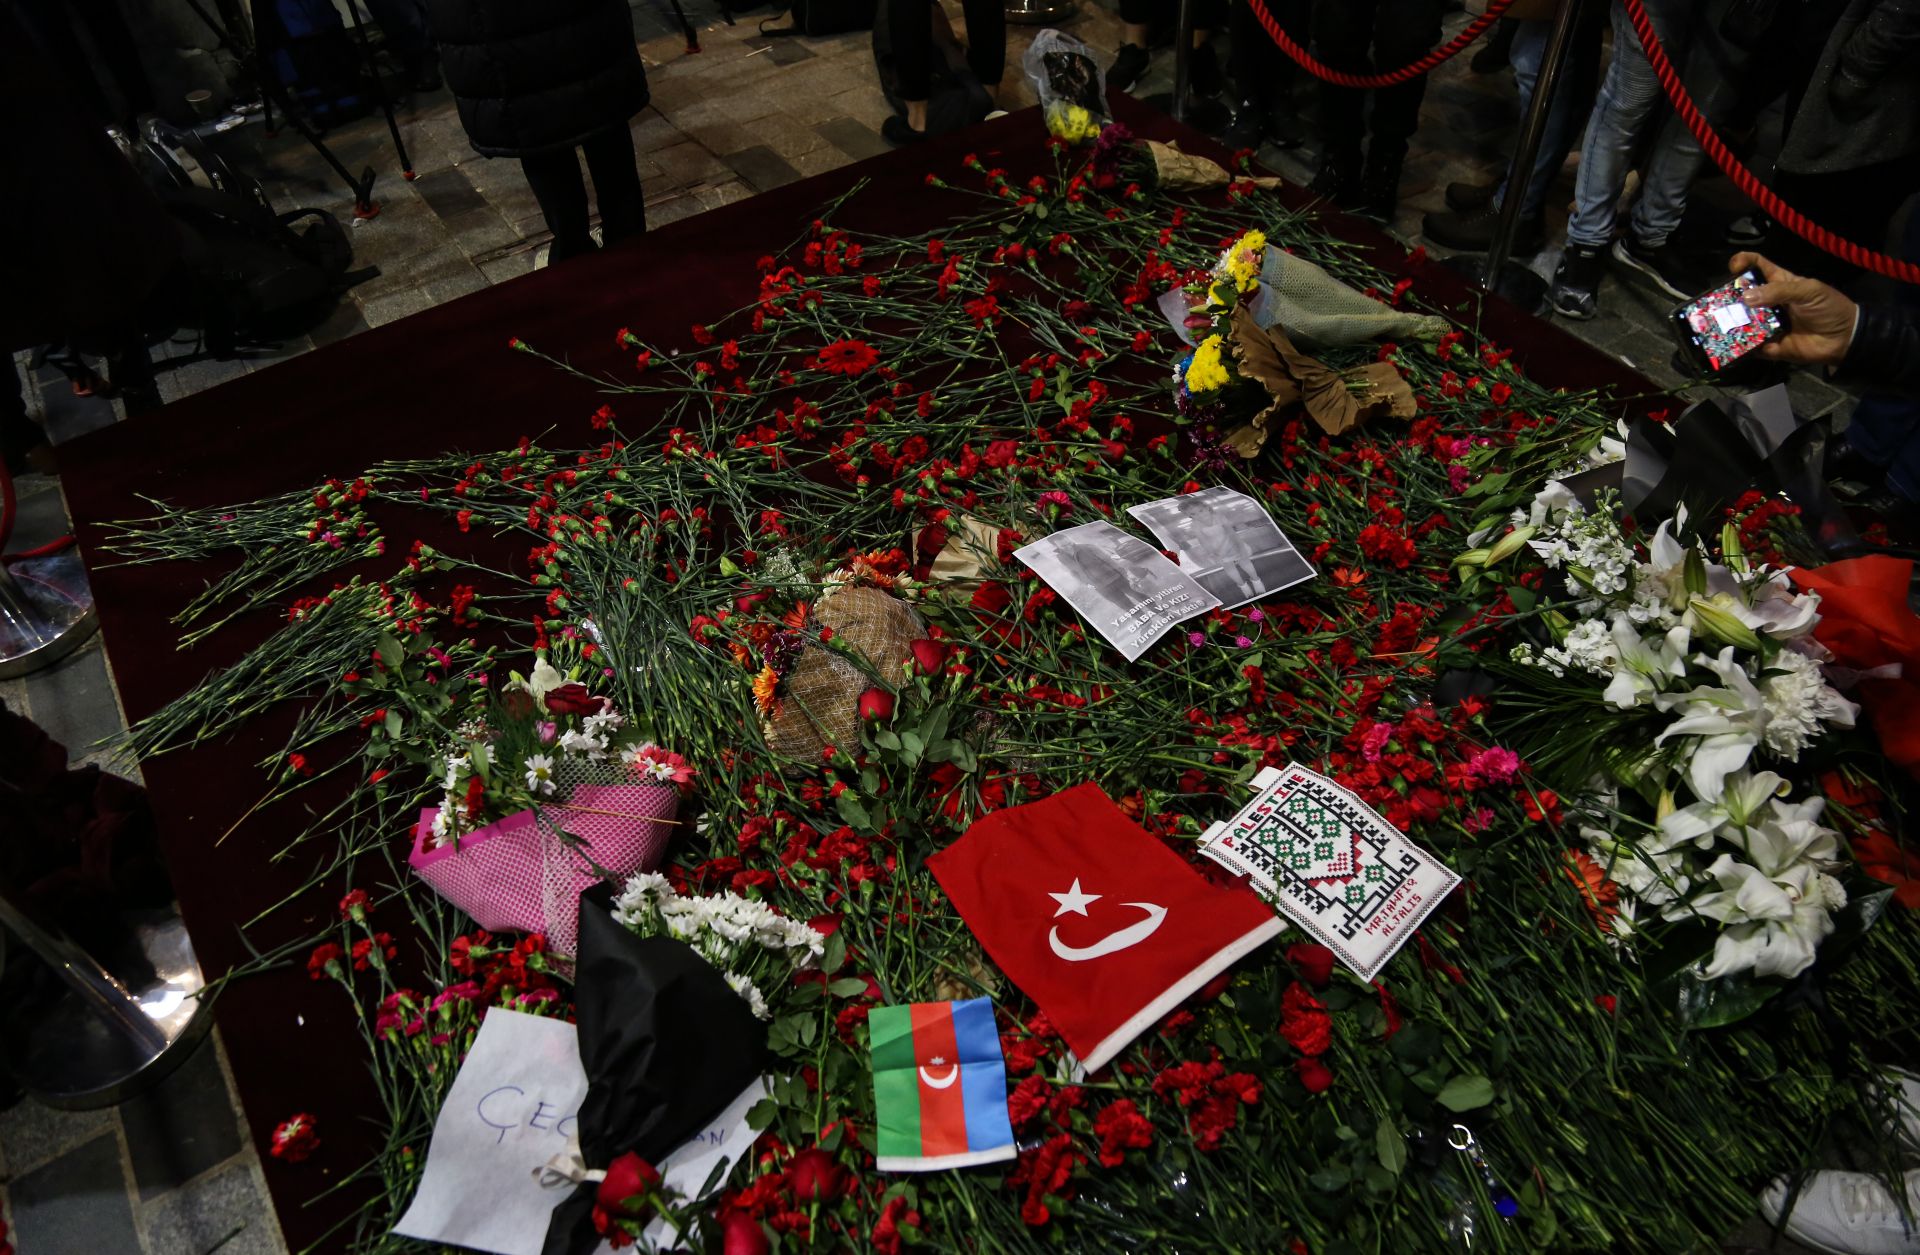 Istanbul's Istiklal Street is seen decorated with Turkish flags and wreaths to commemorate those who died in the terrorist attack on Nov. 13, 2022.